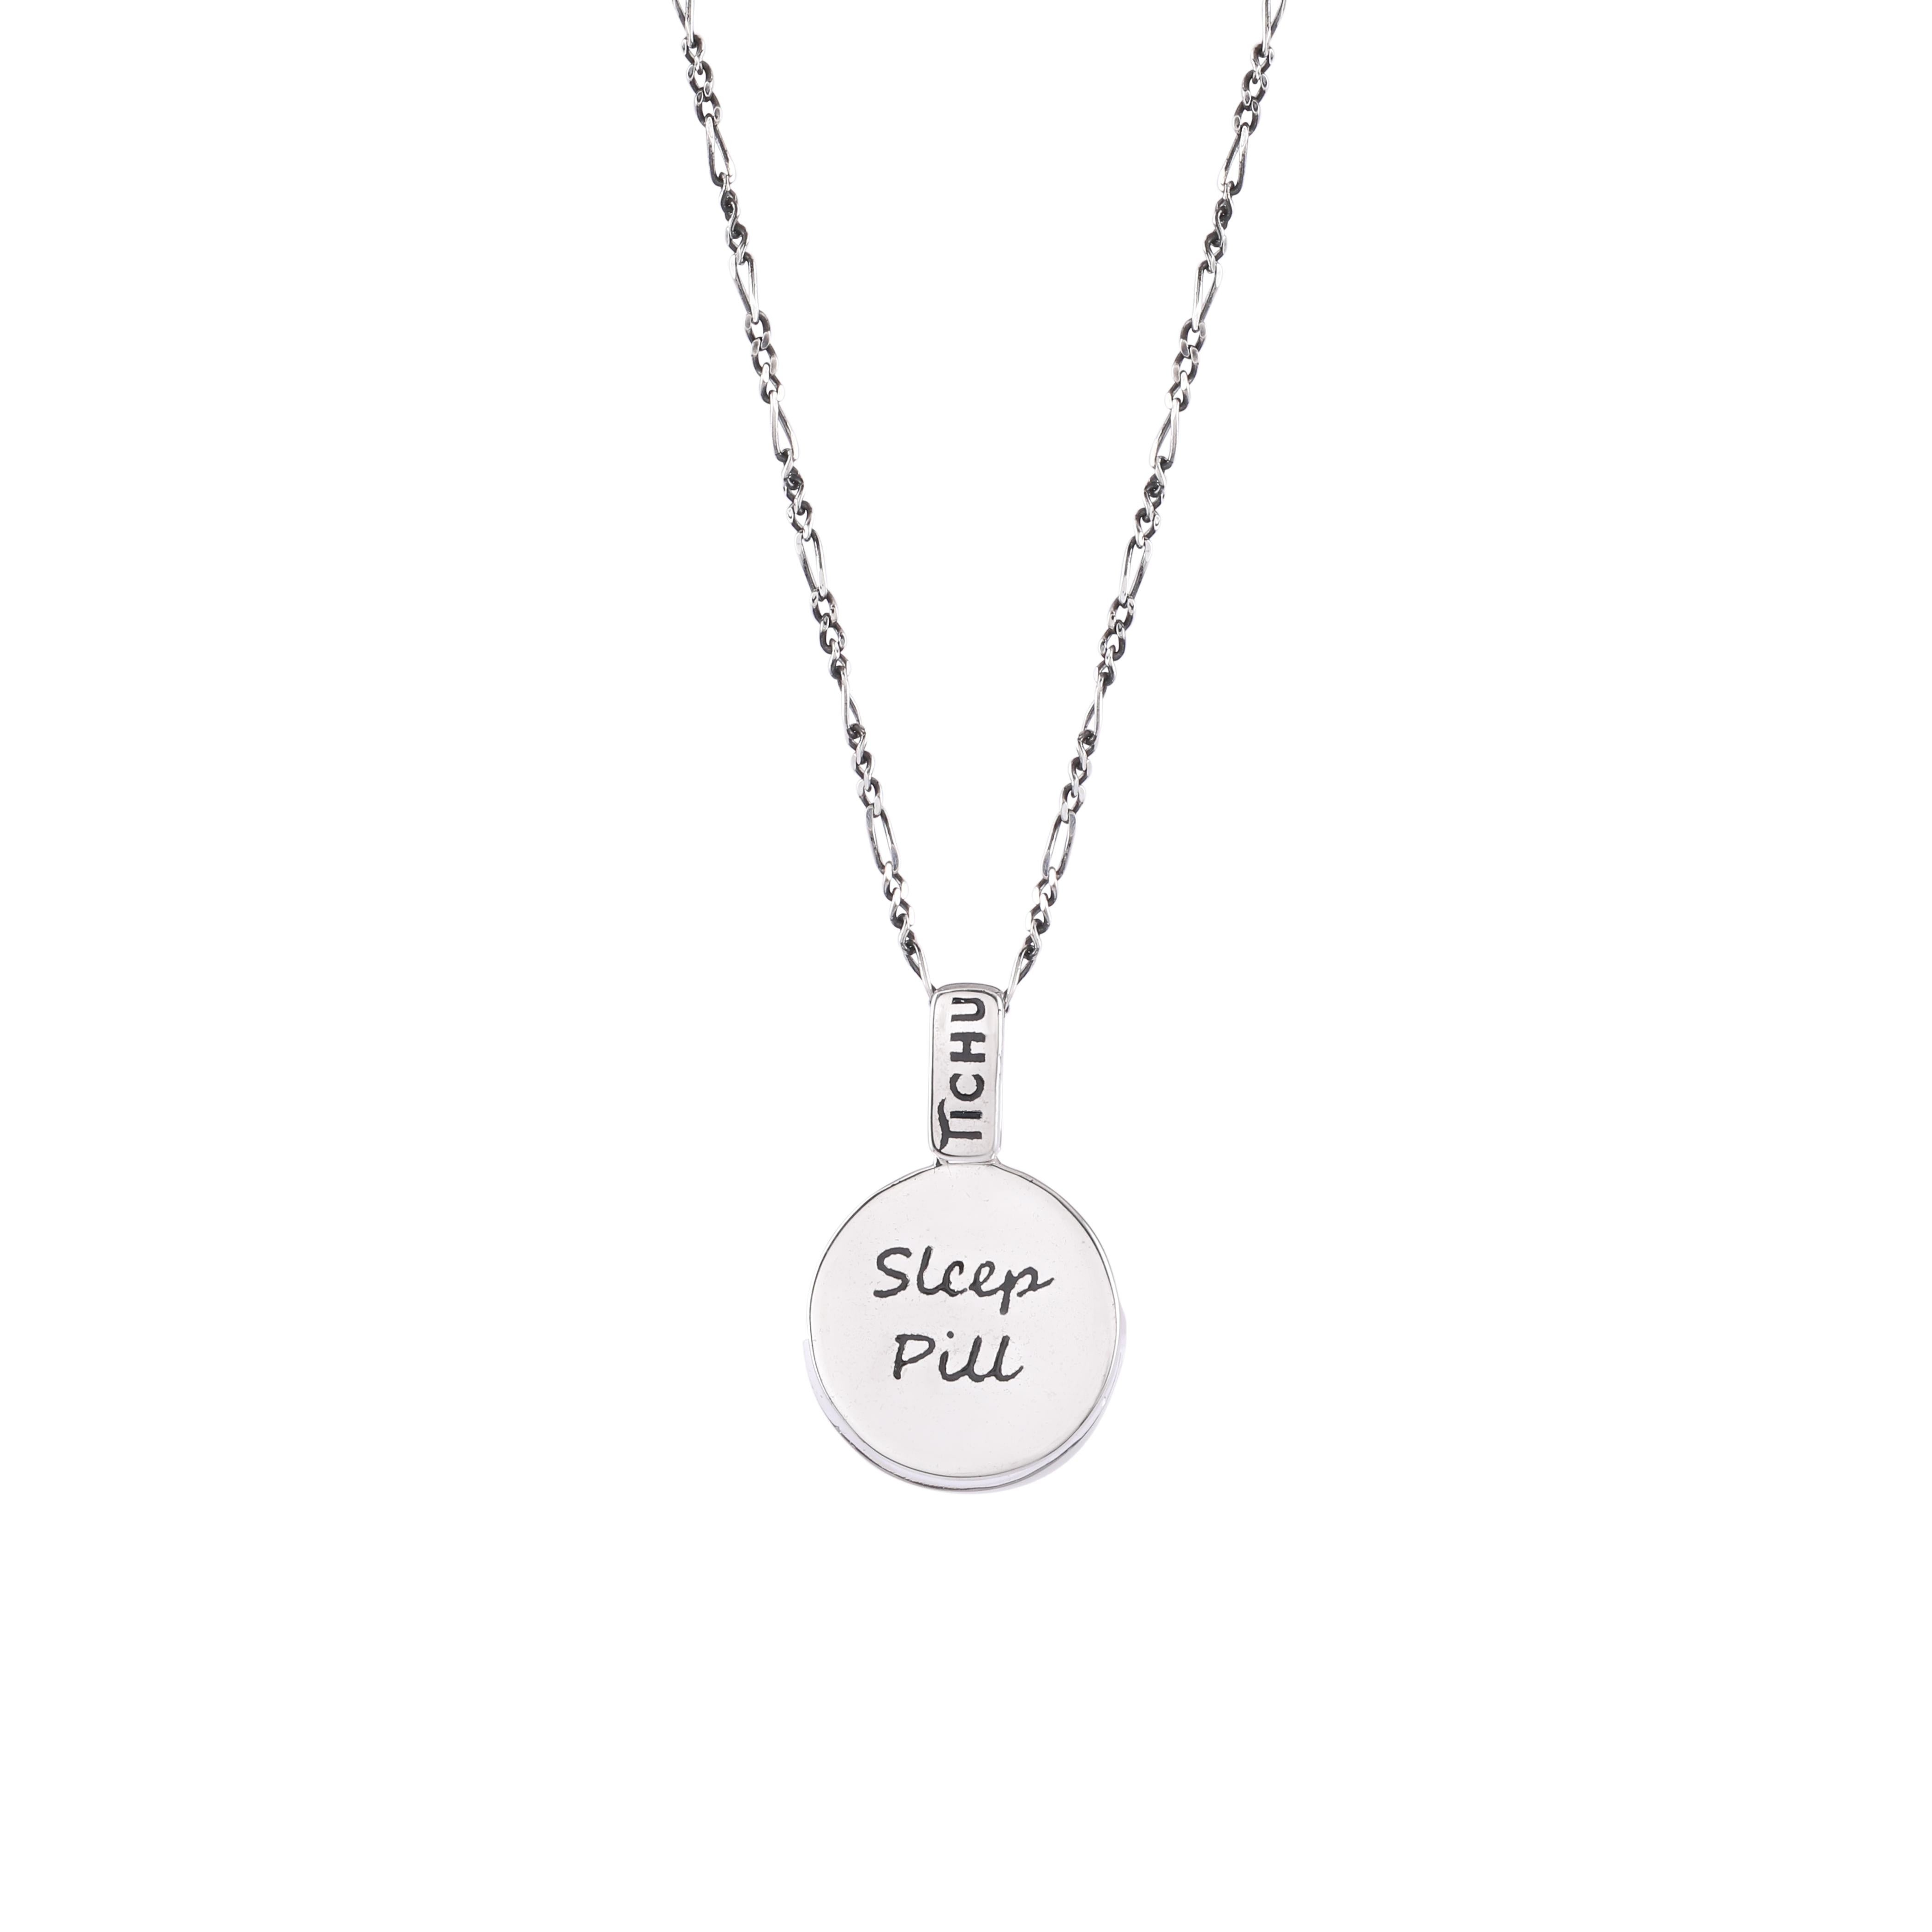 A wholesome sleep cycle is significant for a calmer and balanced mind. The crystal brings you one step closer to peace by clearing away the unconstructive thoughts within your mind.

Each Sleep Pill Pendant is handcrafted in Sterling Silver,